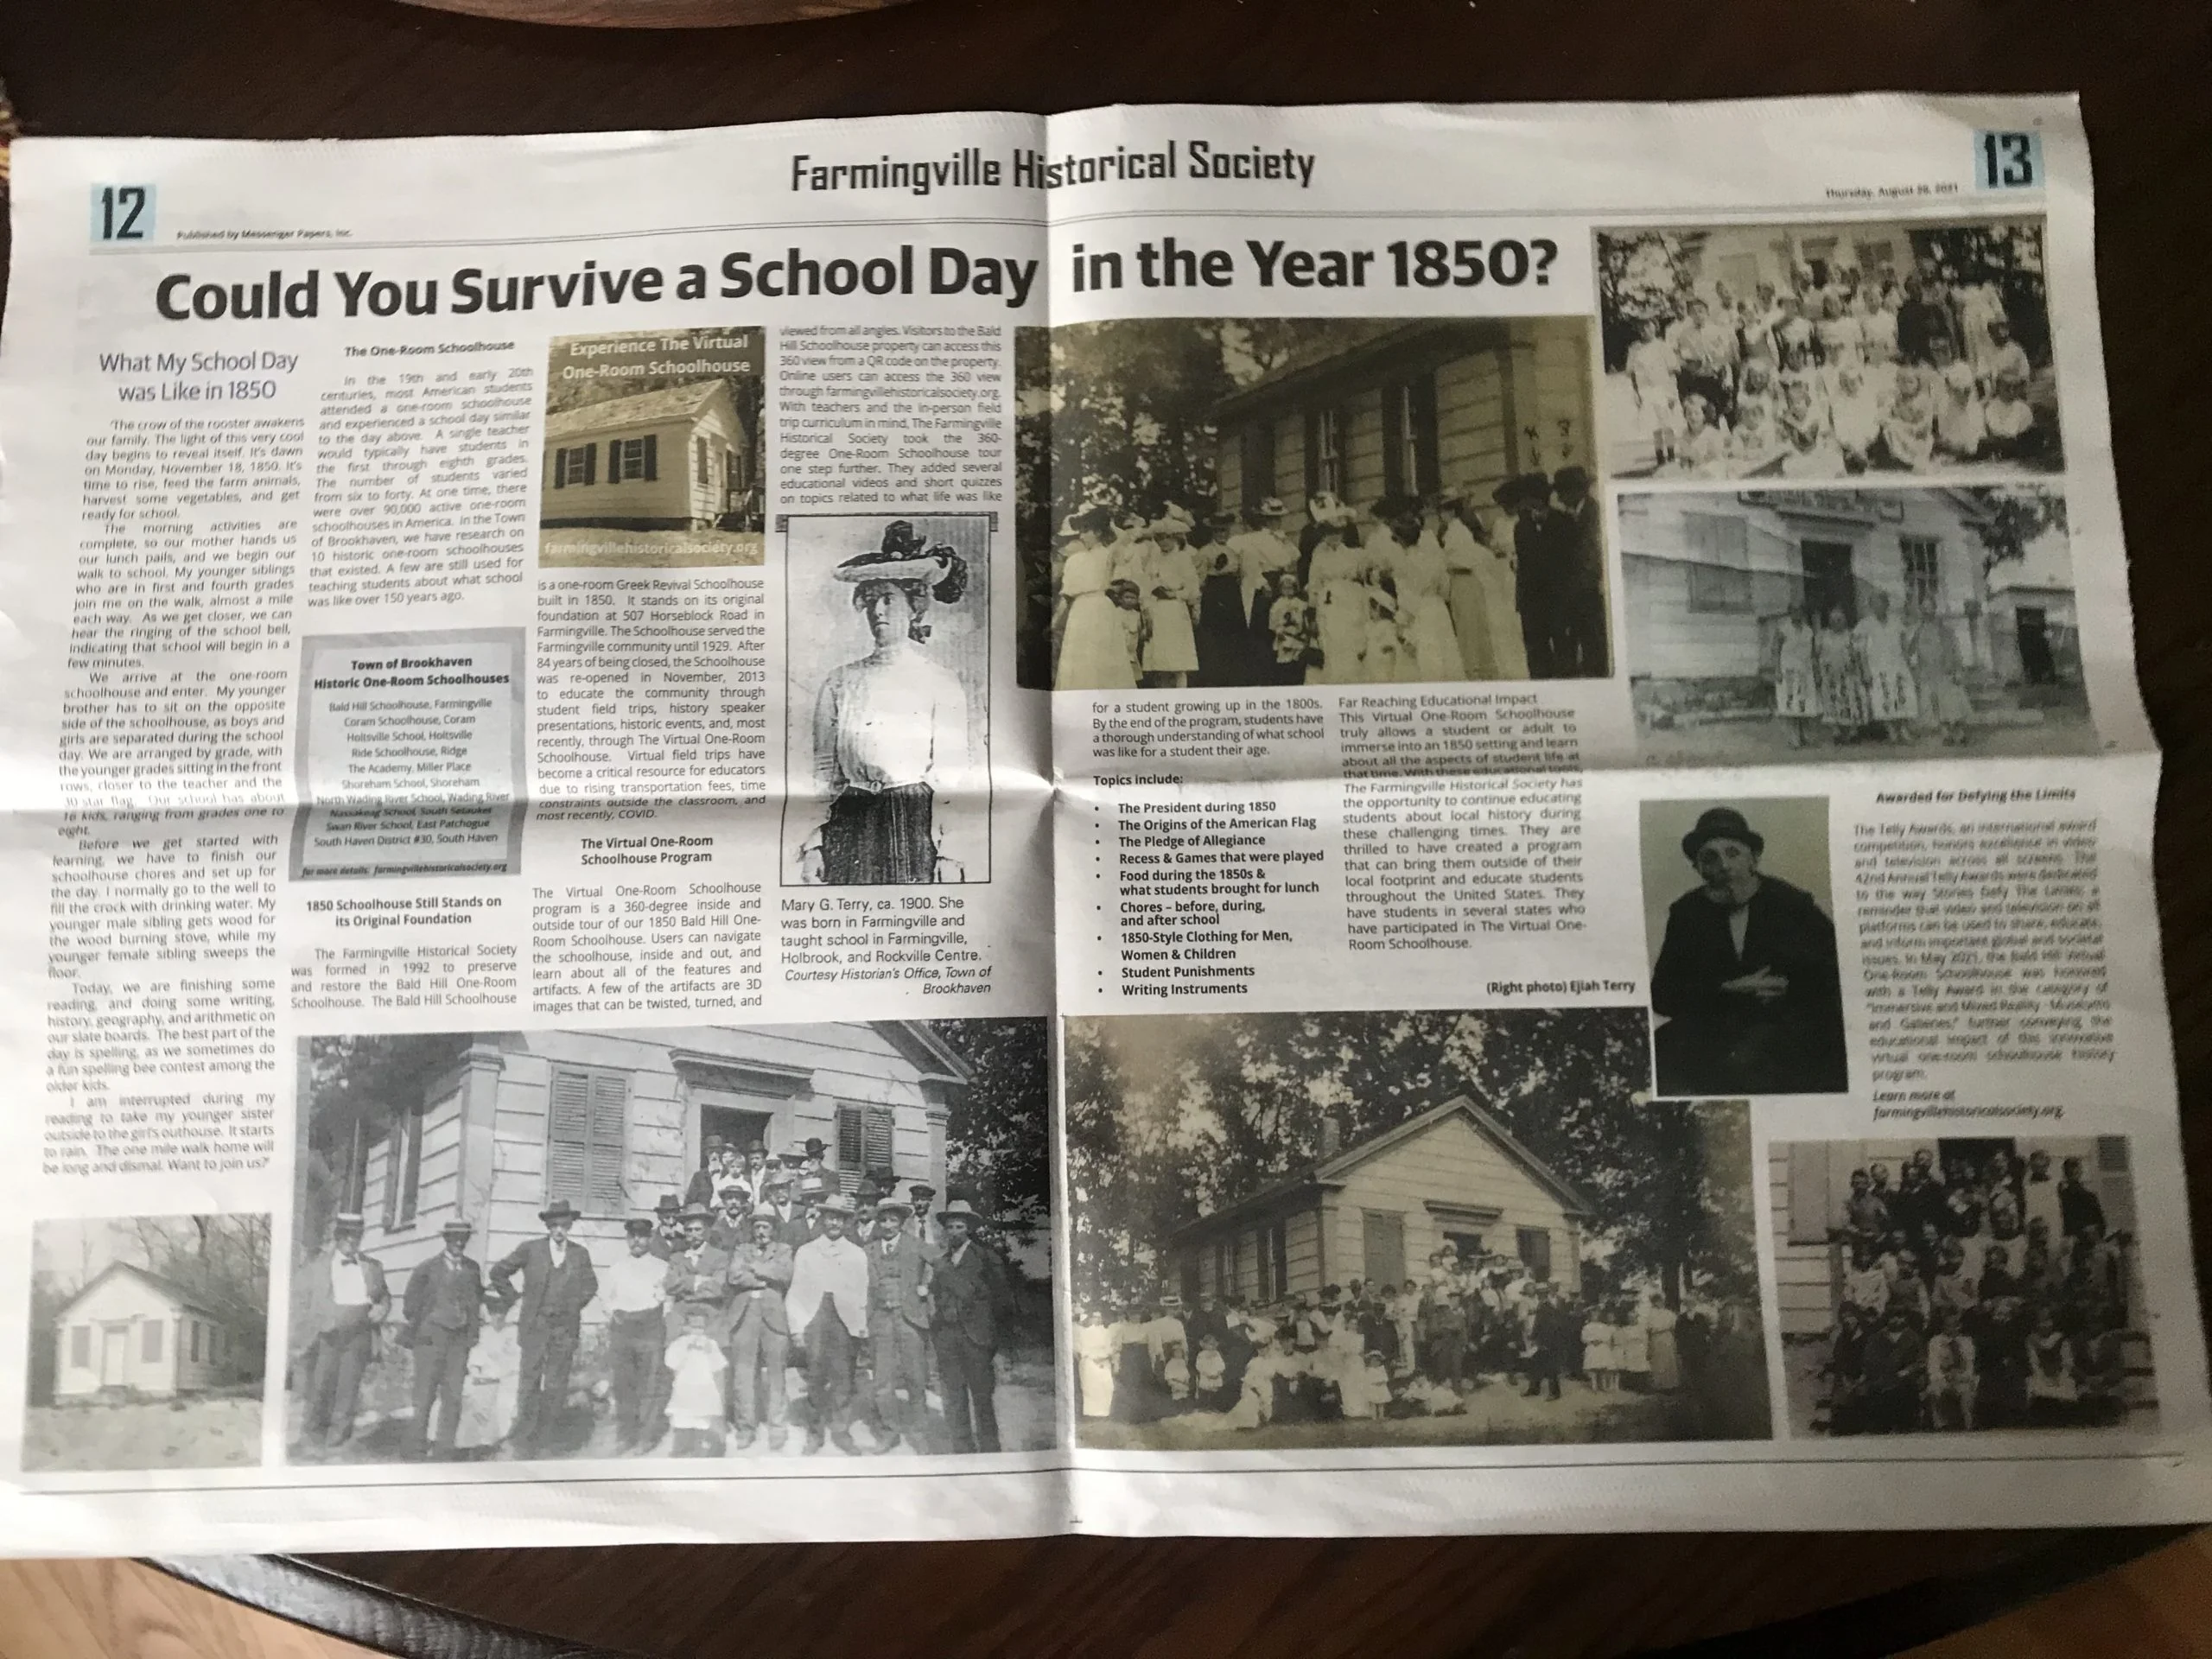 Could You Survive a School Day in the Year 1850?